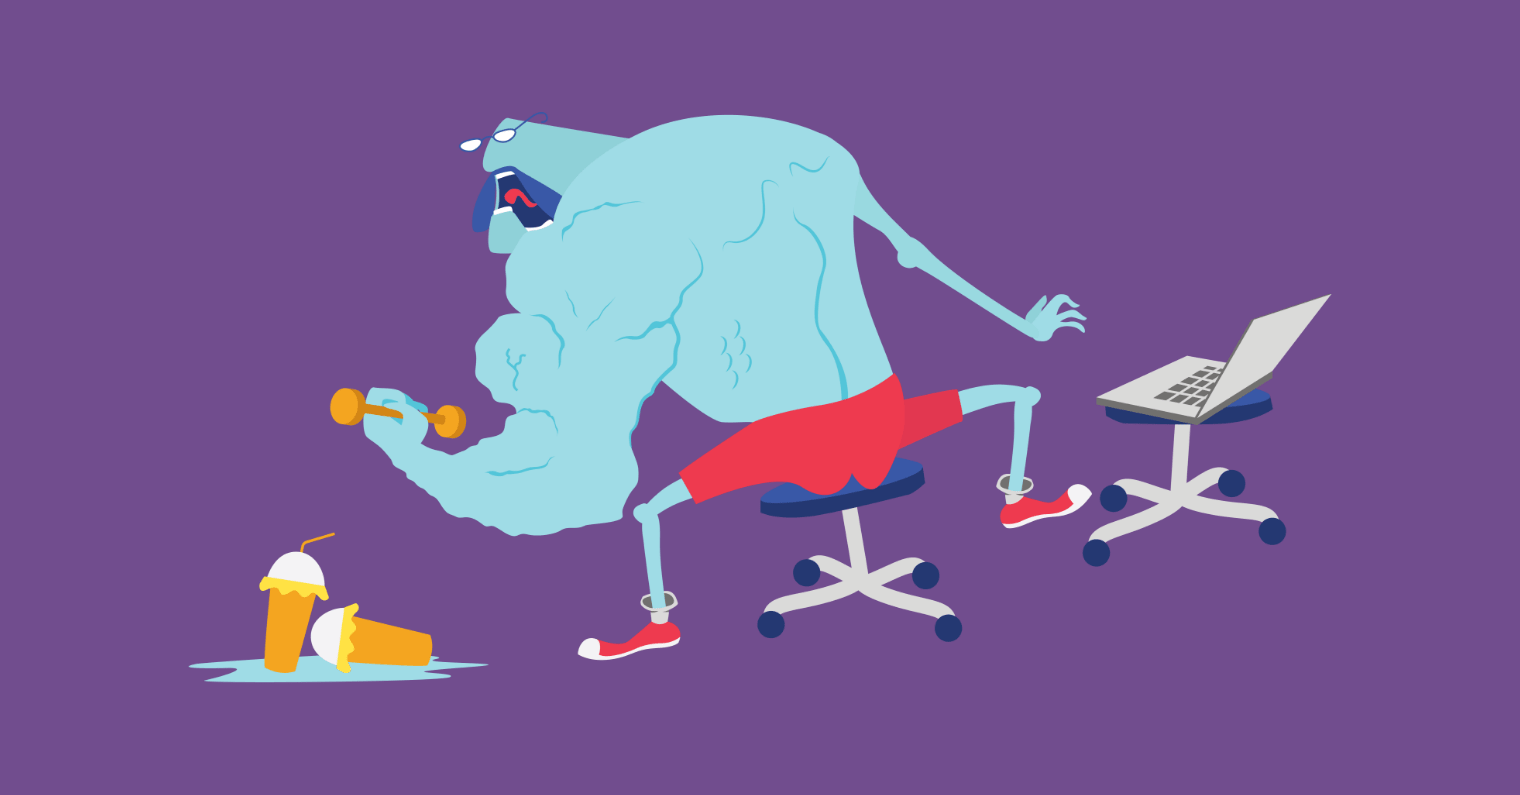 An illustrated character lifting weights and using a computer